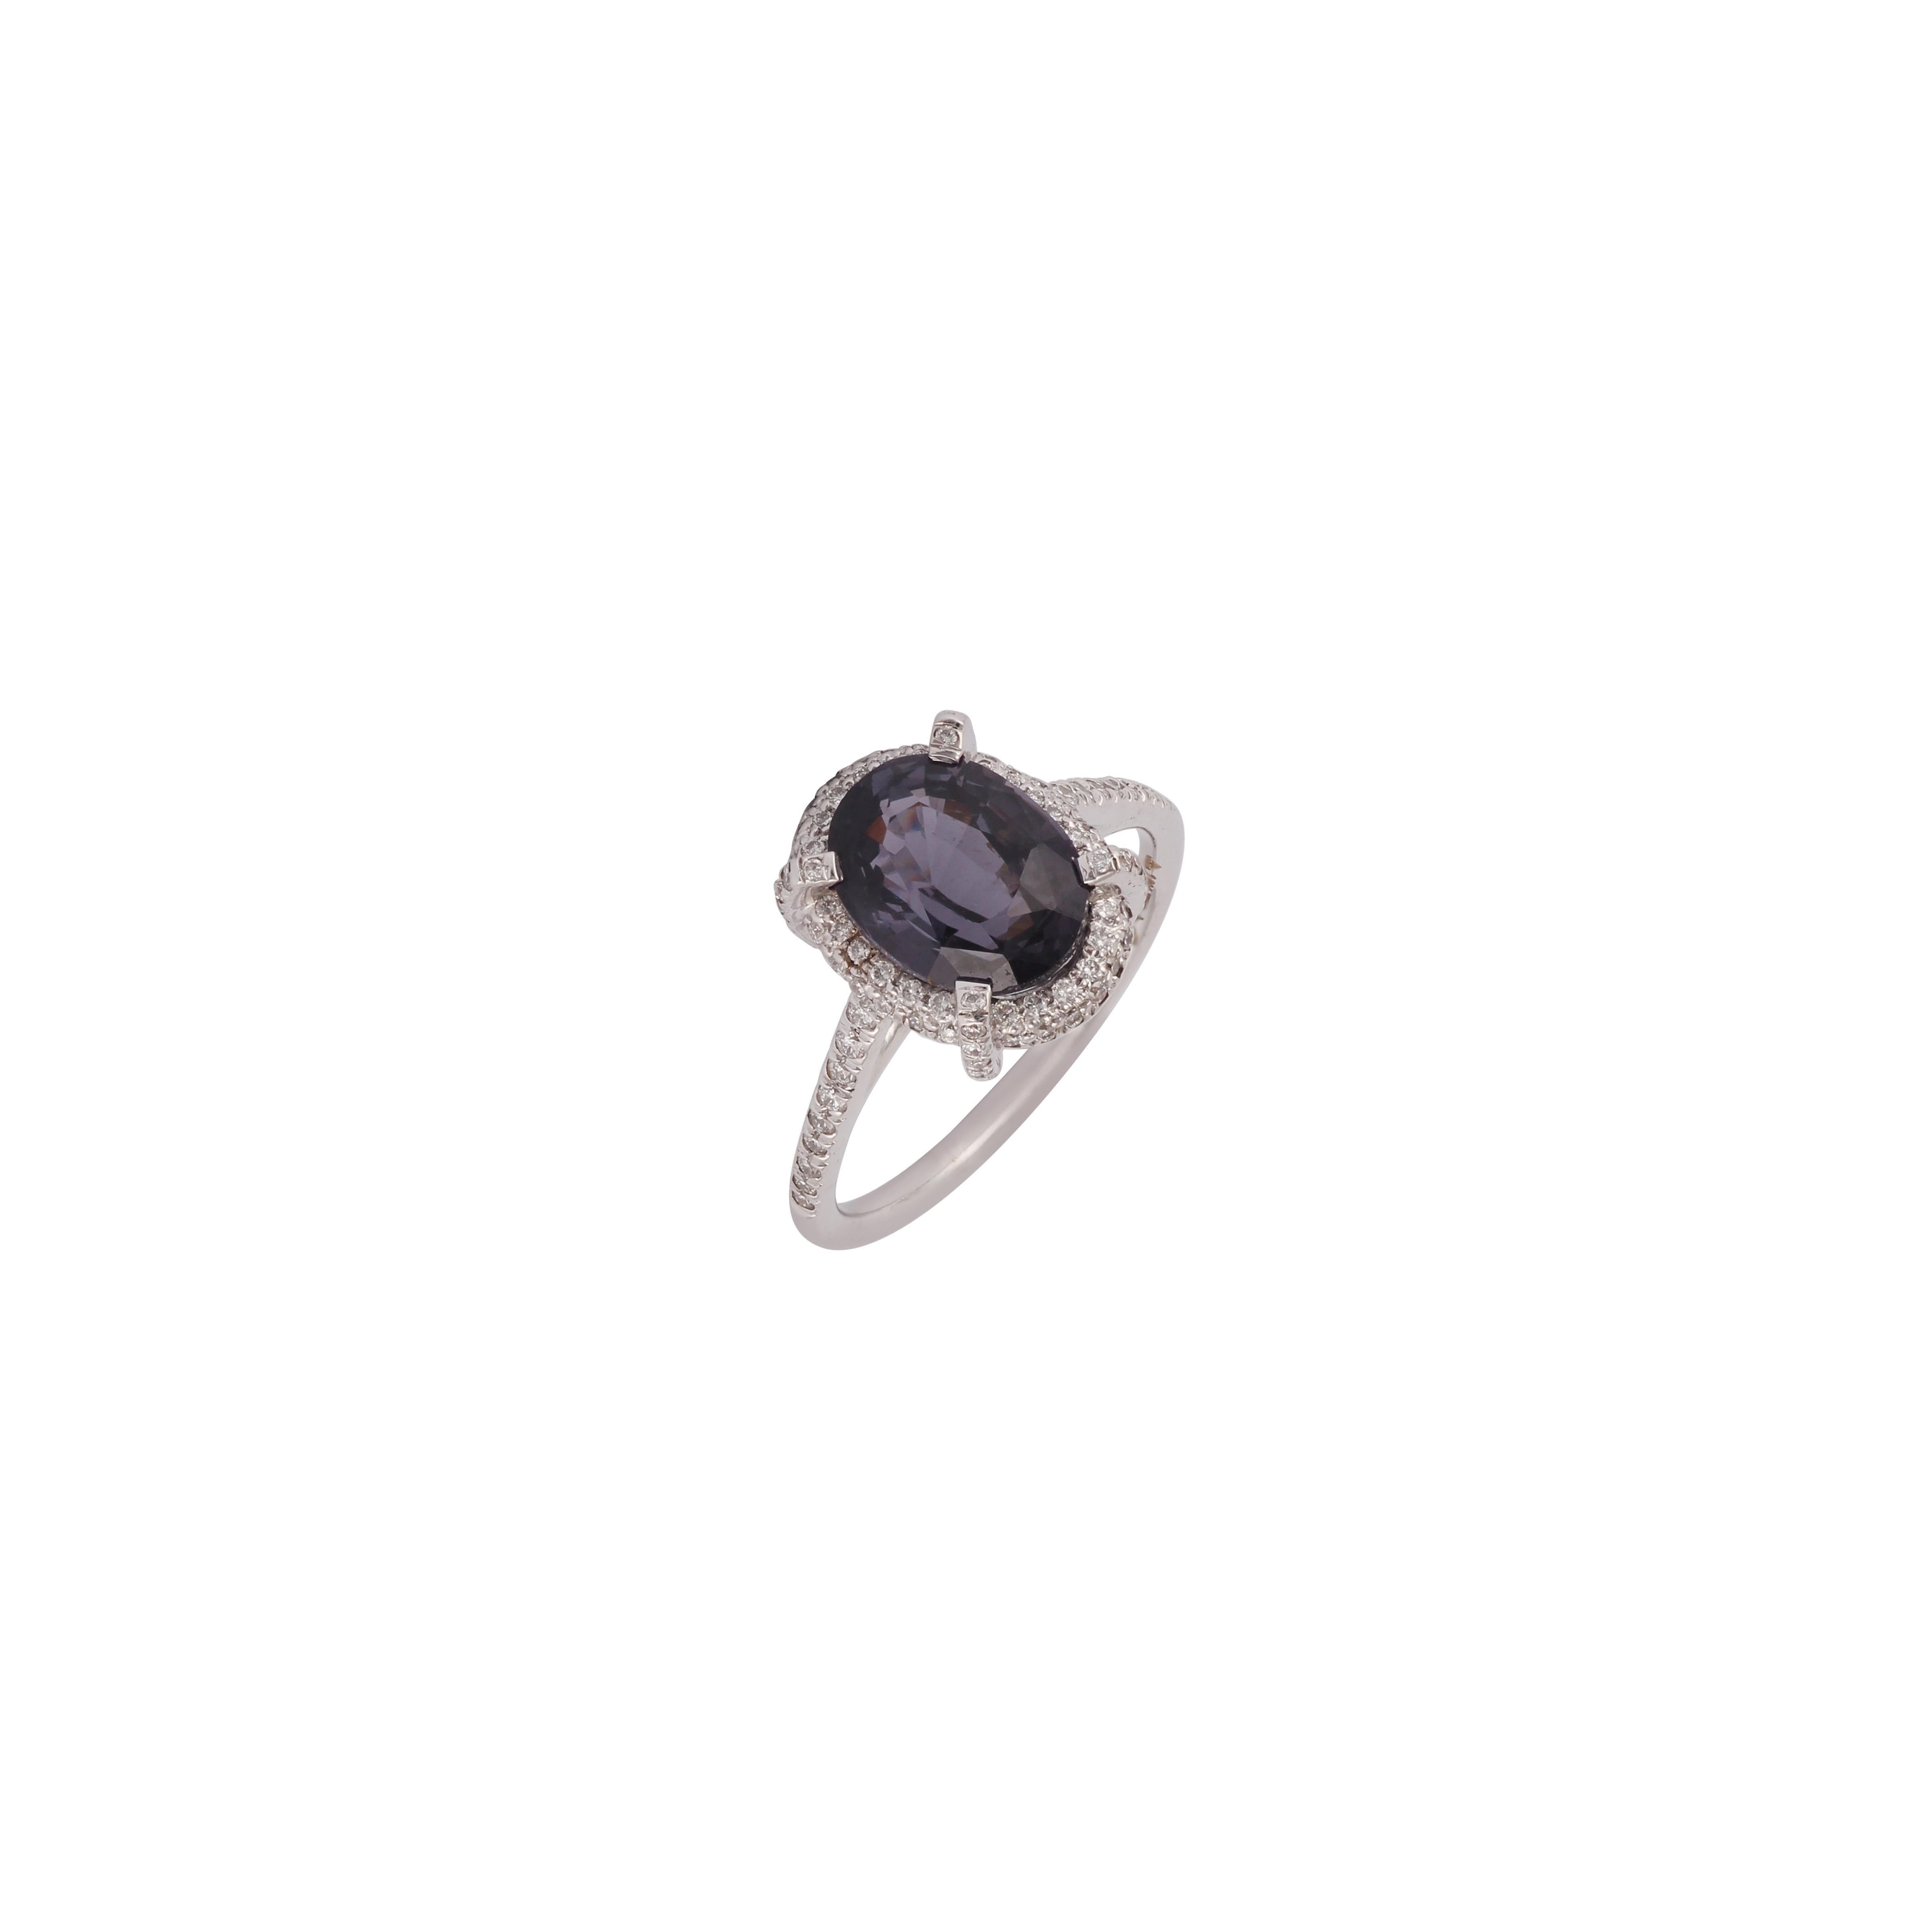 Oval Cut 3.72 Carat Spinel Diamond Ring Studded in 18K White Gold For Sale